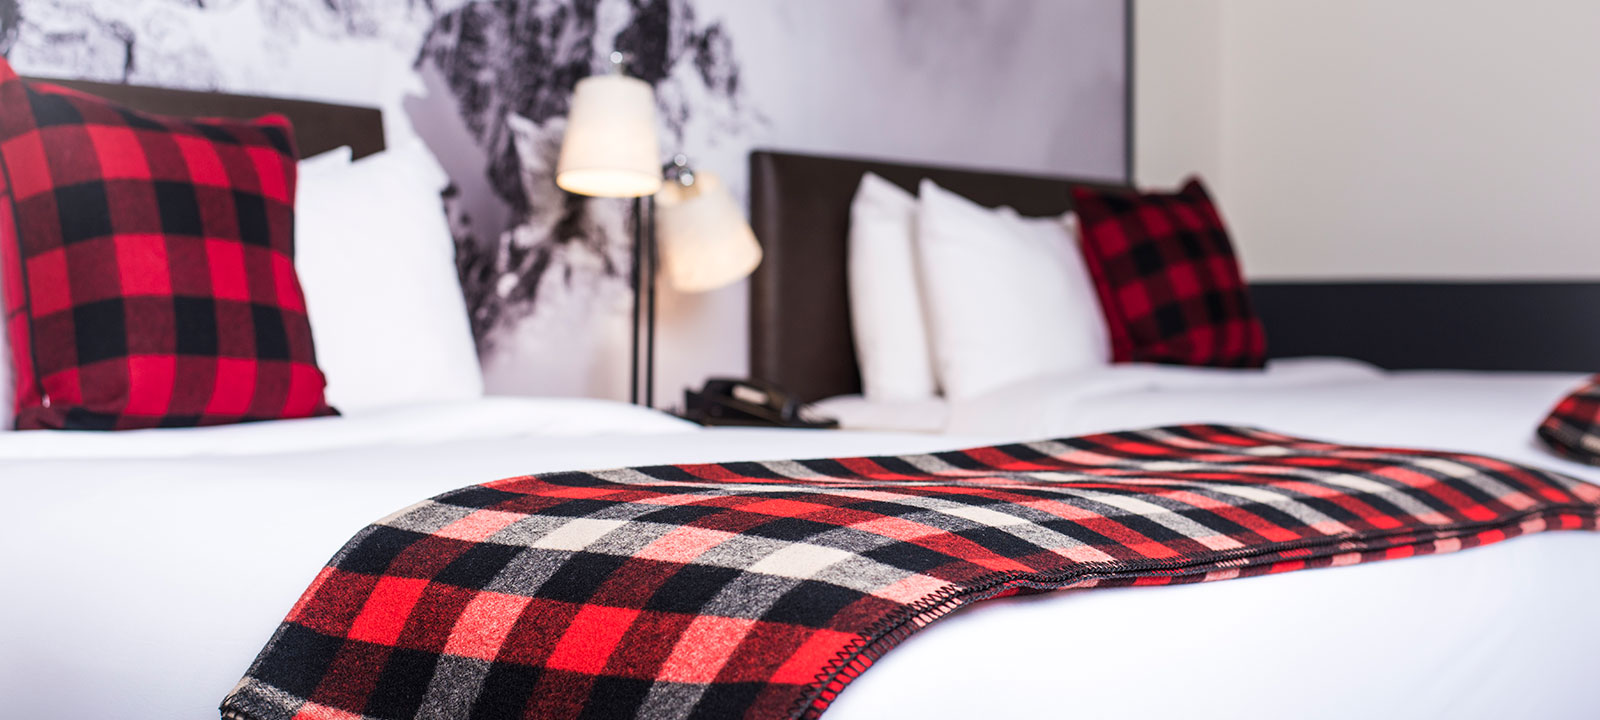 Mountain Modern Motel bed with red, black, and white plaid blanket